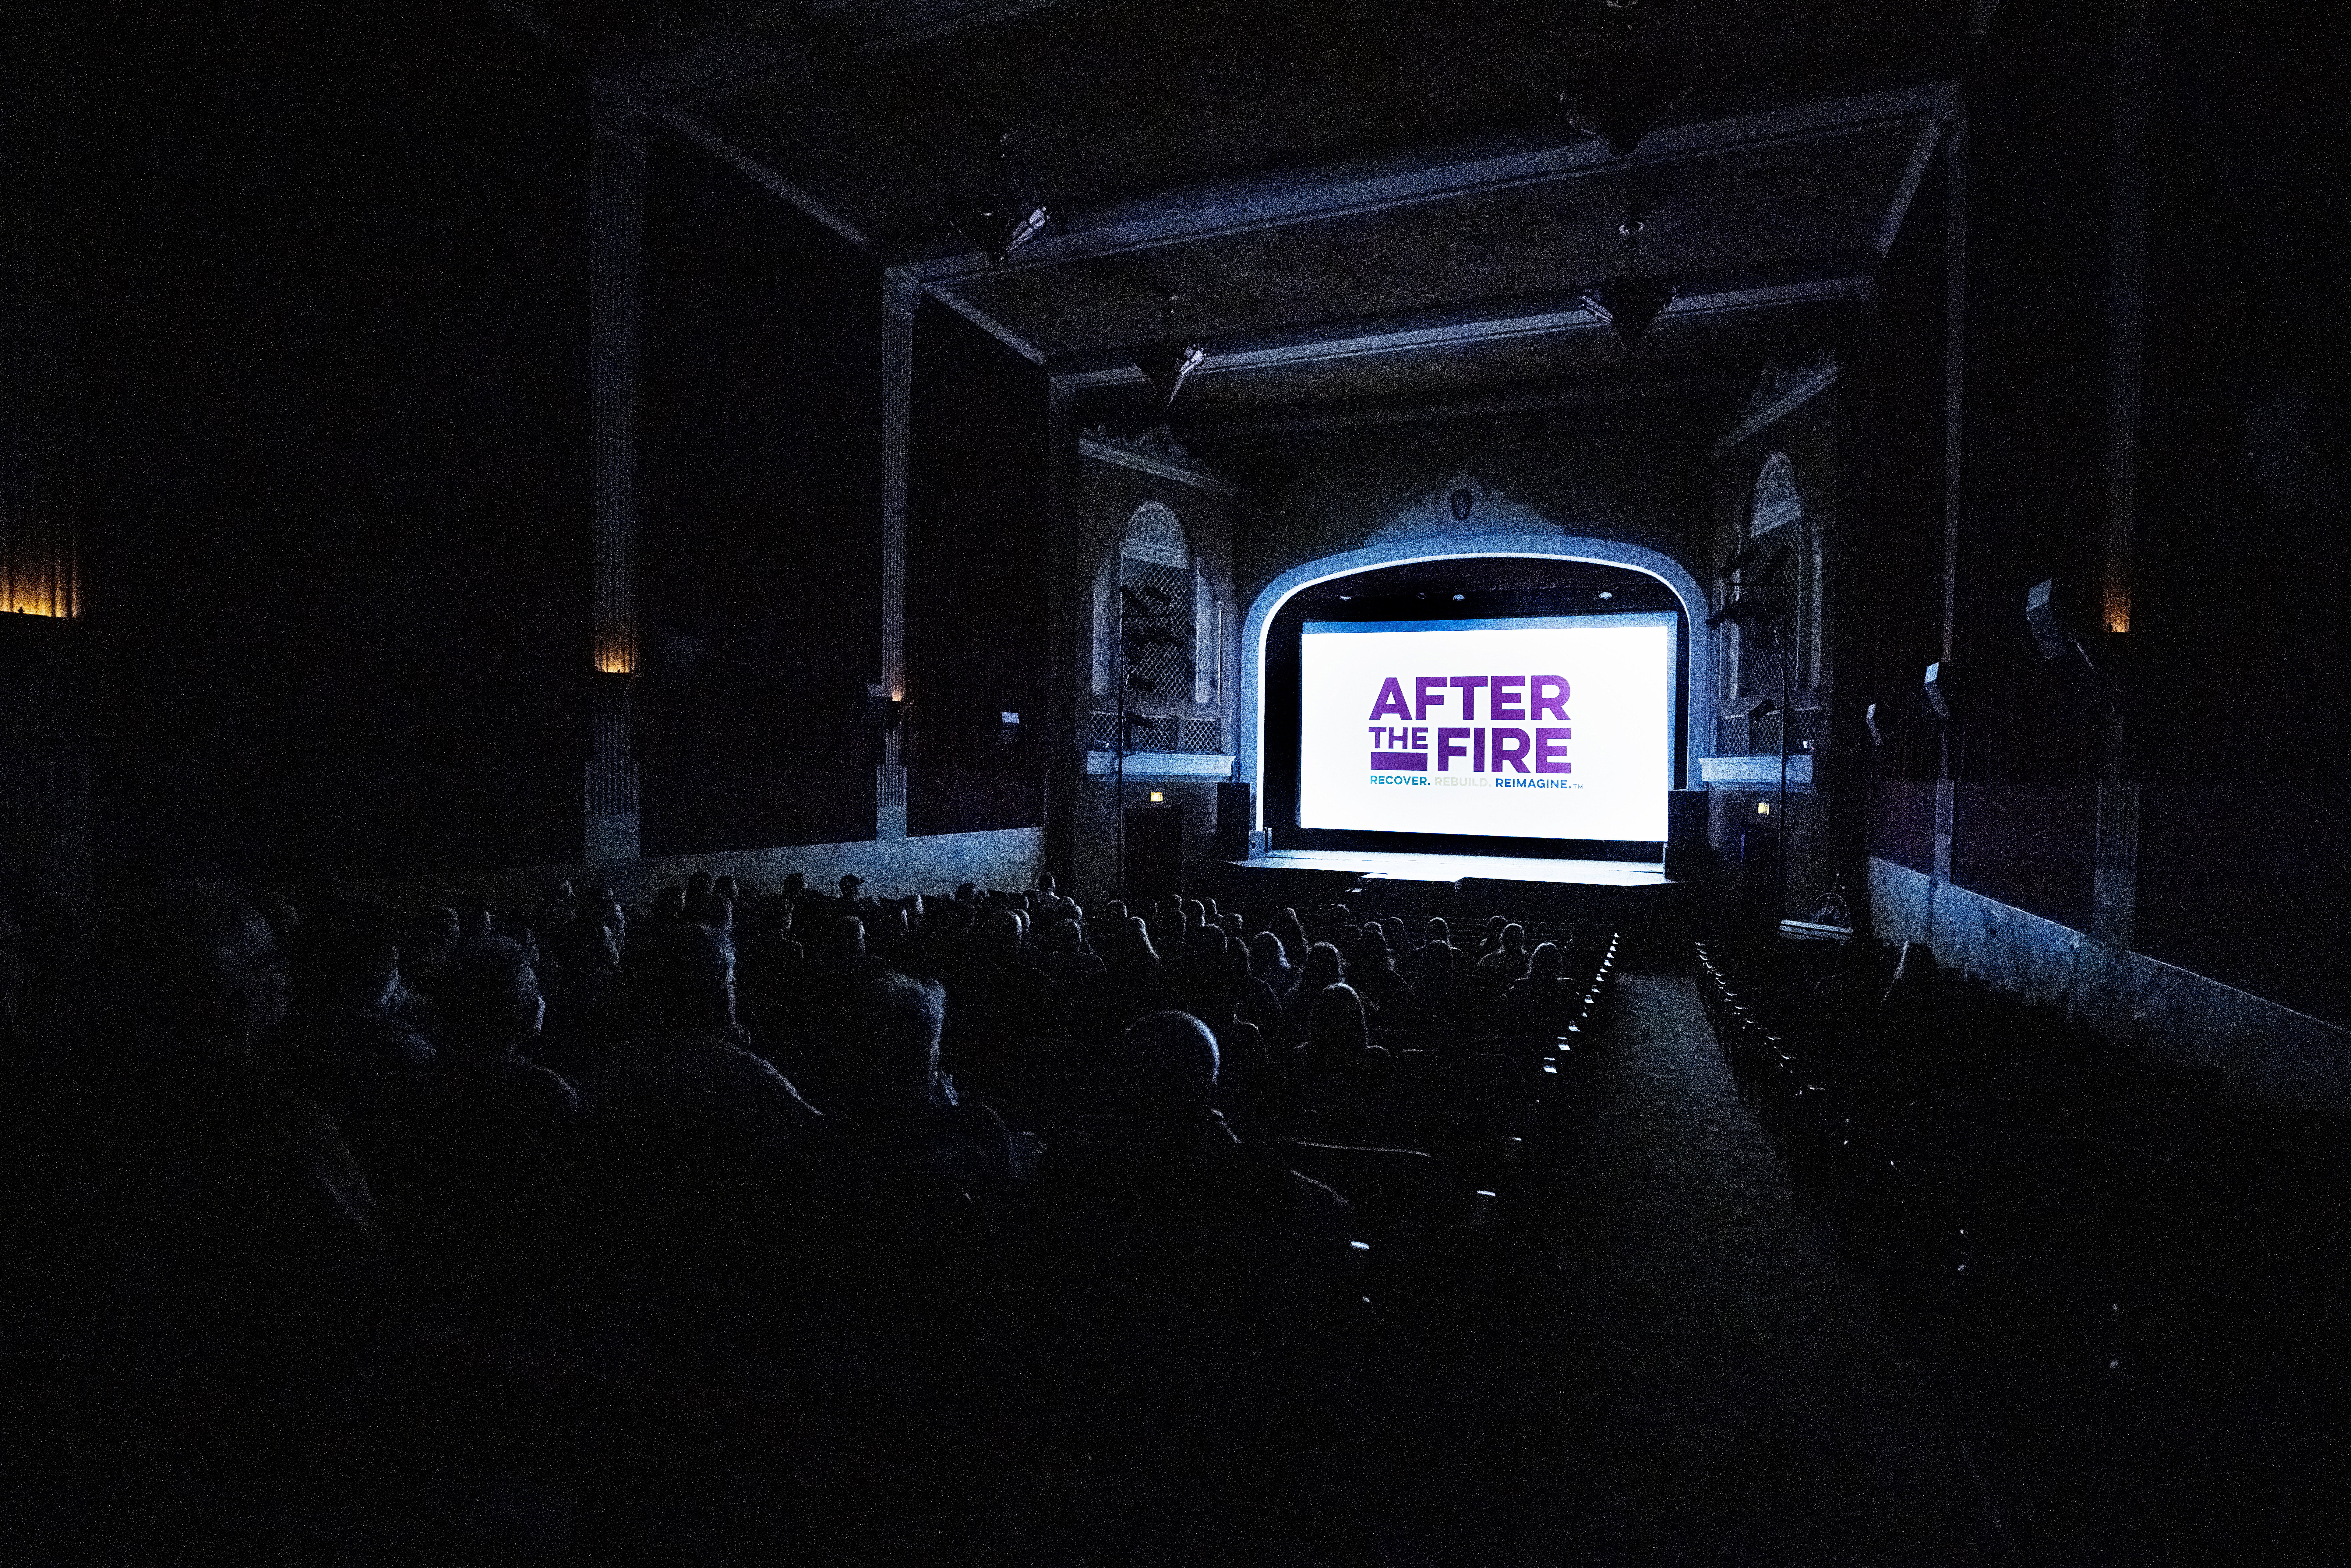 inside the dark movie theater with After the Fire Logo on the screen